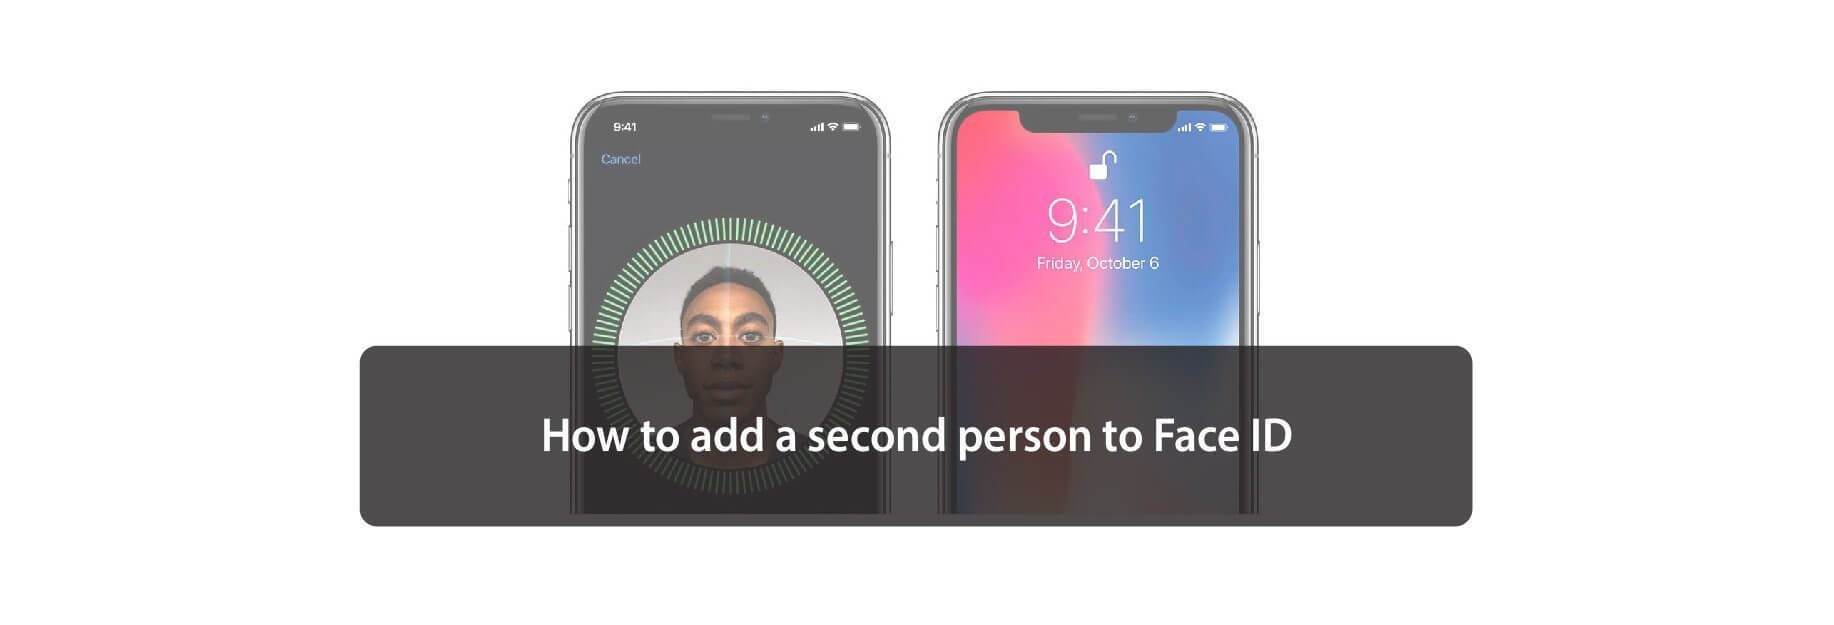 How to add a second person to Face ID